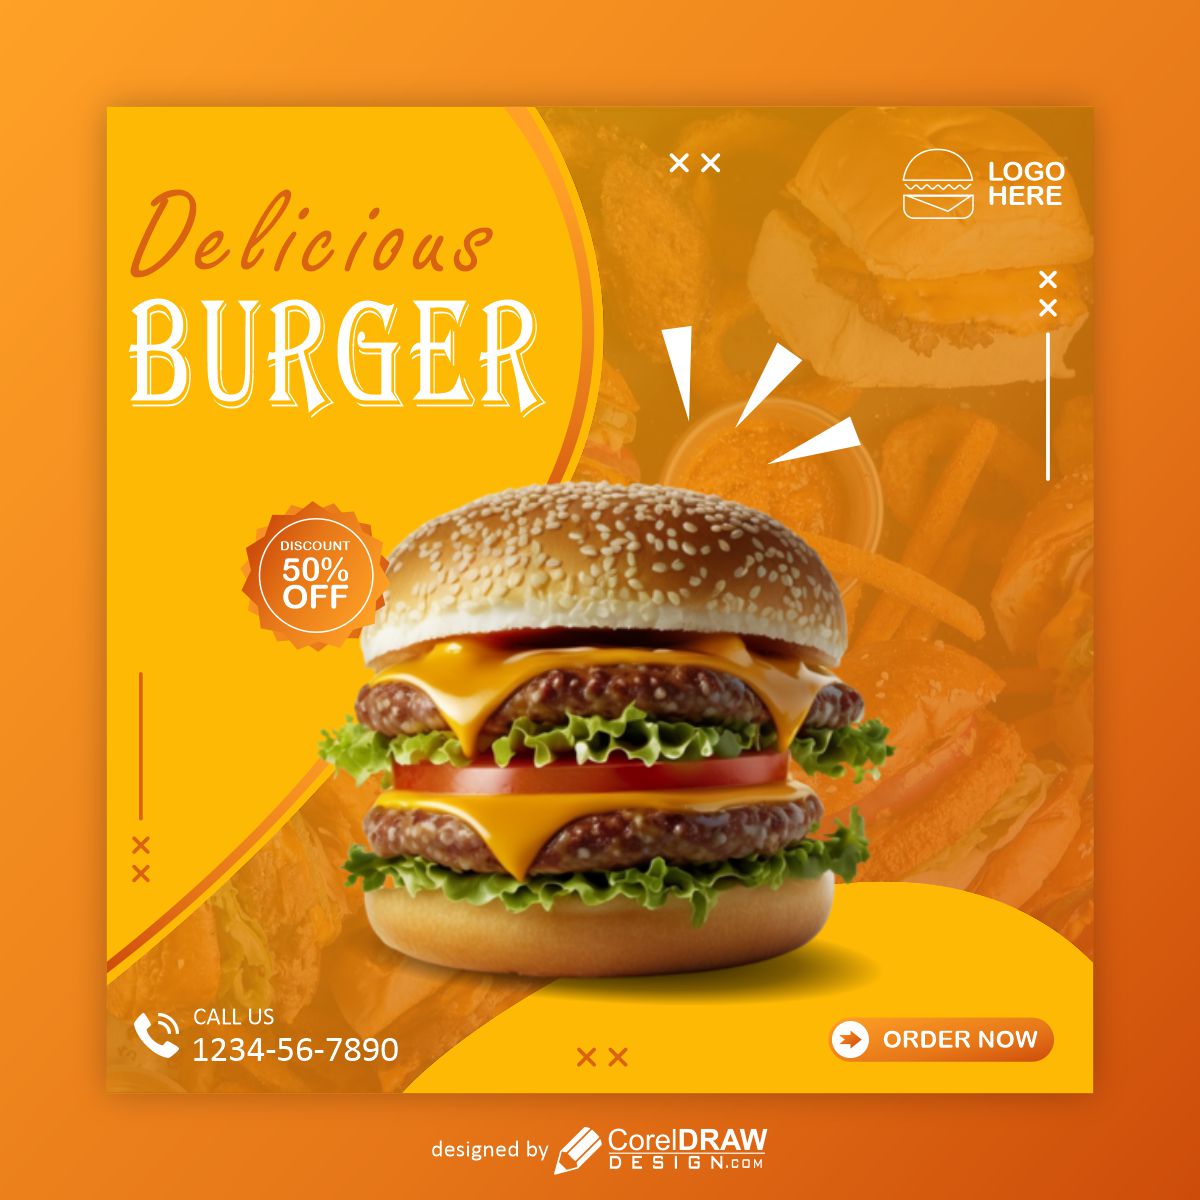 Delicious Burger poster design download for free